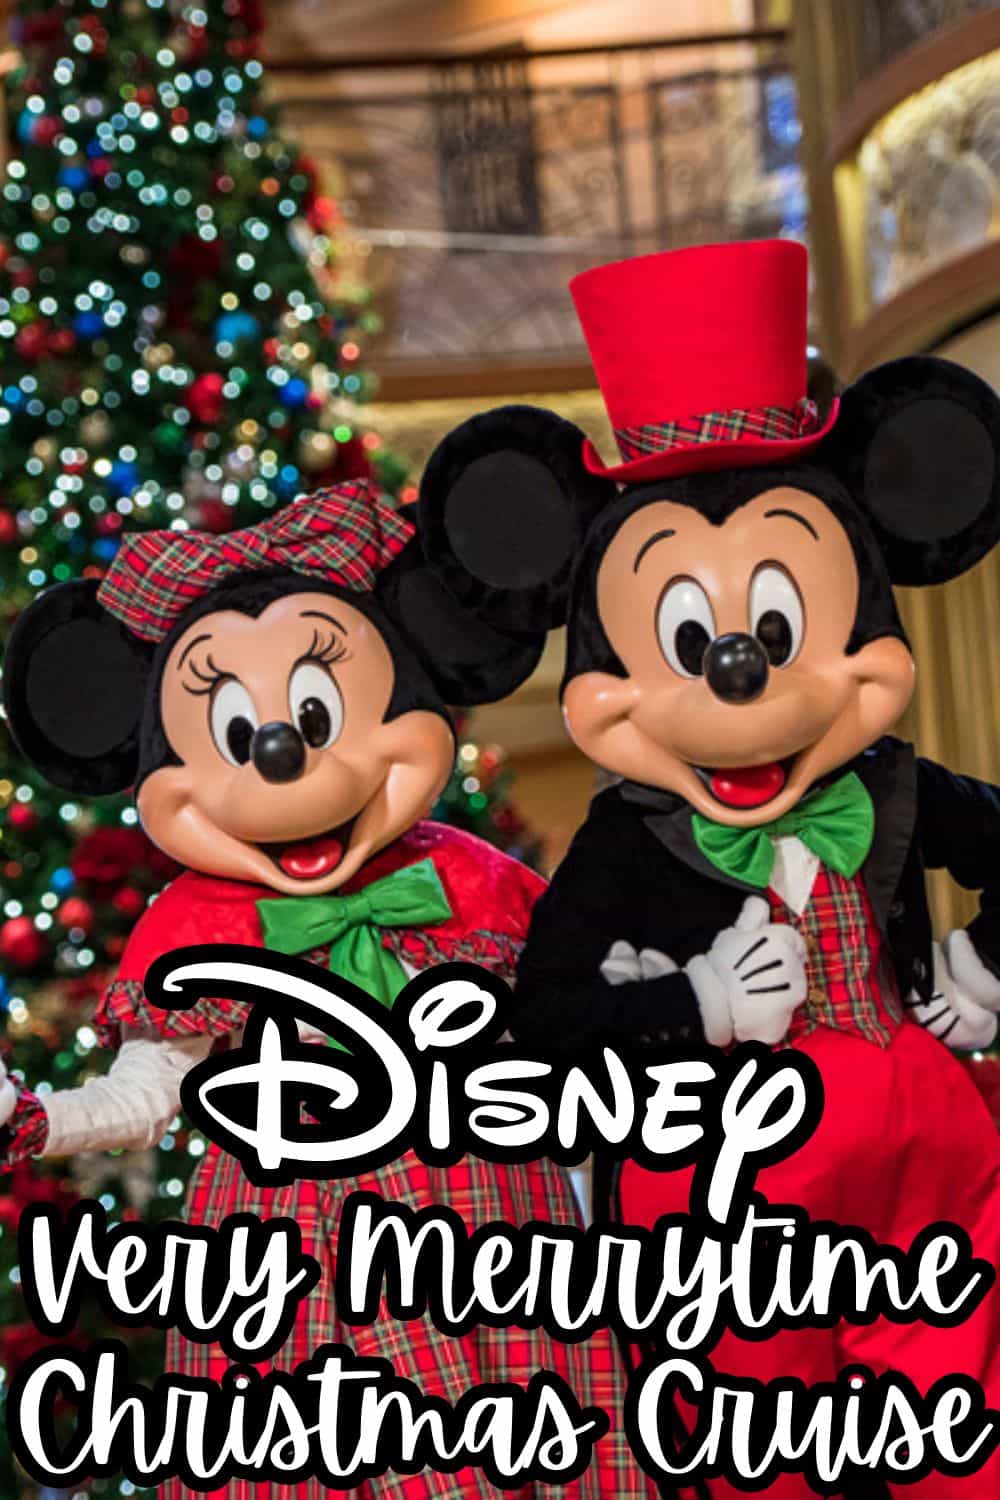 Things You Will Experience on a Disney Very Merrytime Cruise